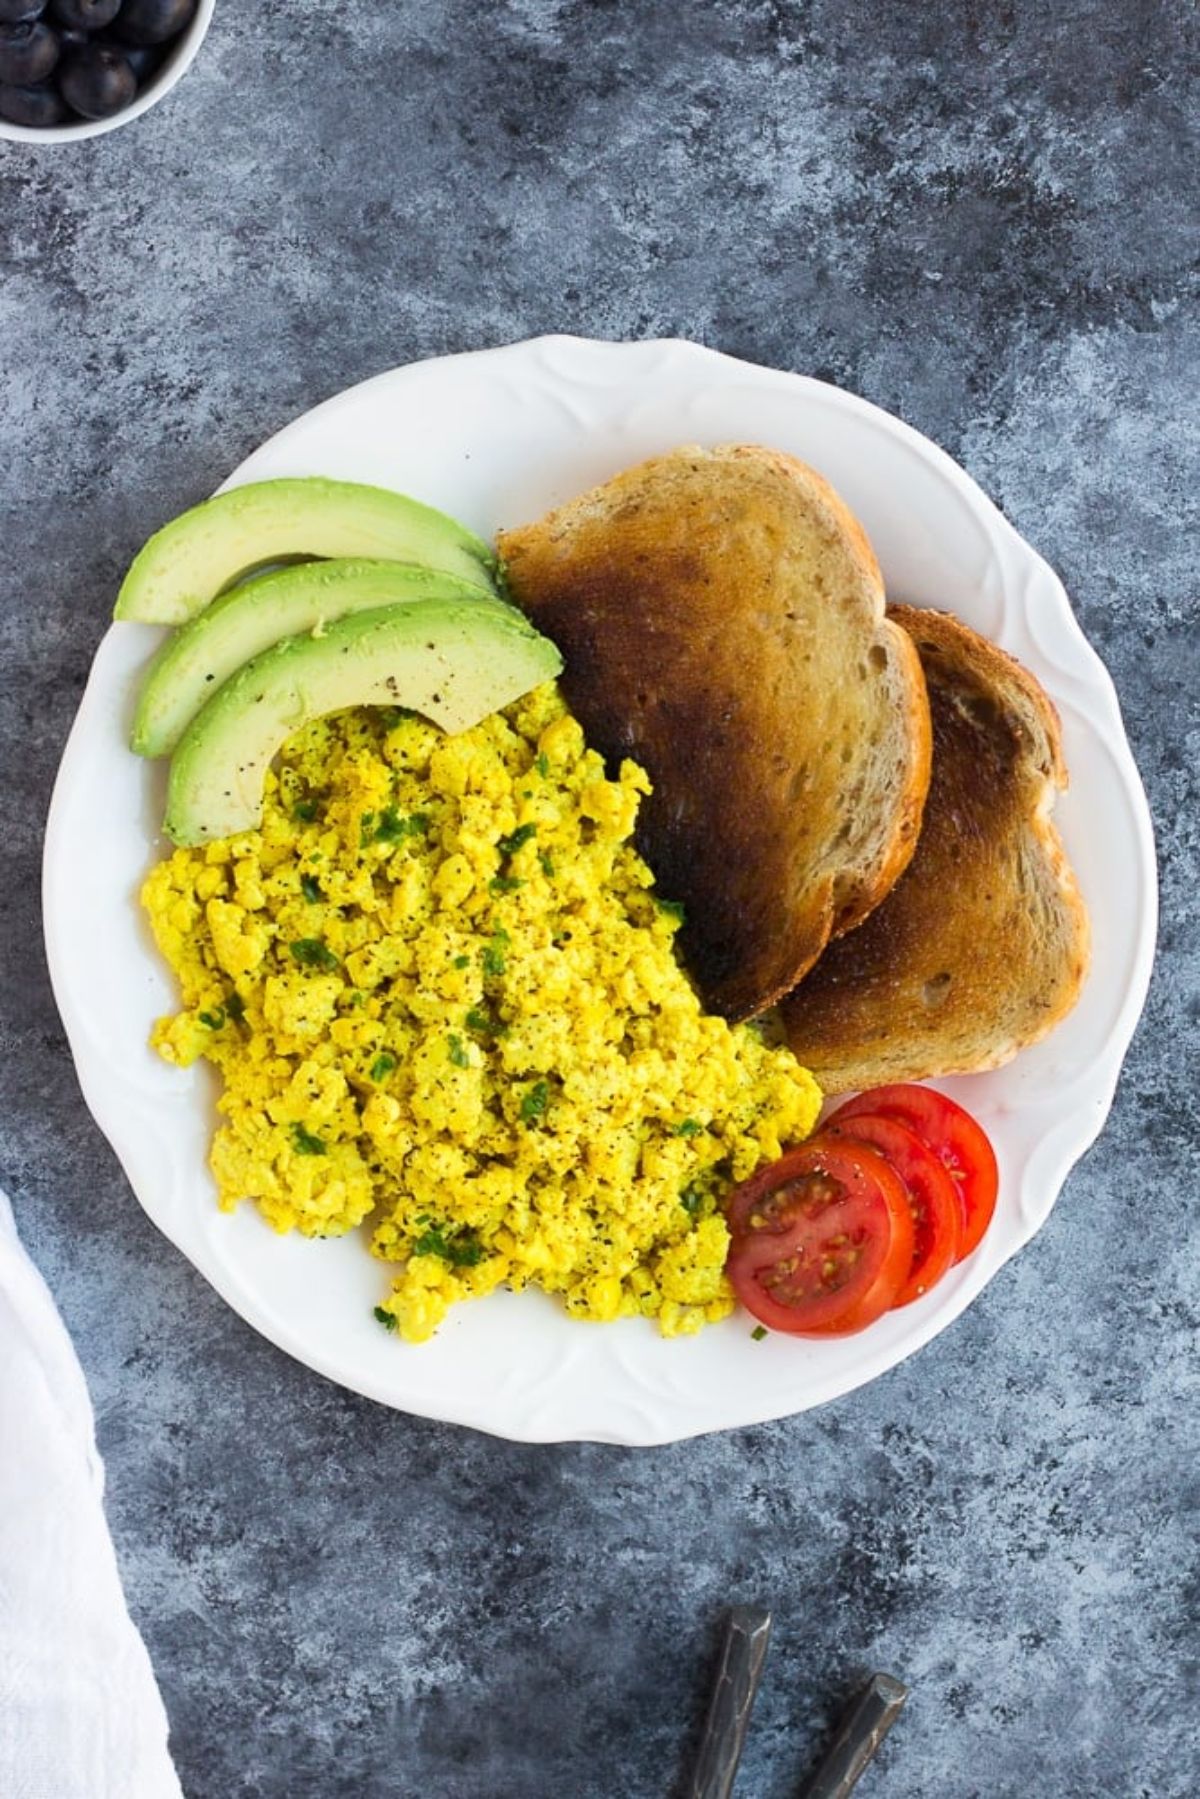 Tofu Scramble with a sliced avocado, tomato and two pieces of bread on a white plate.